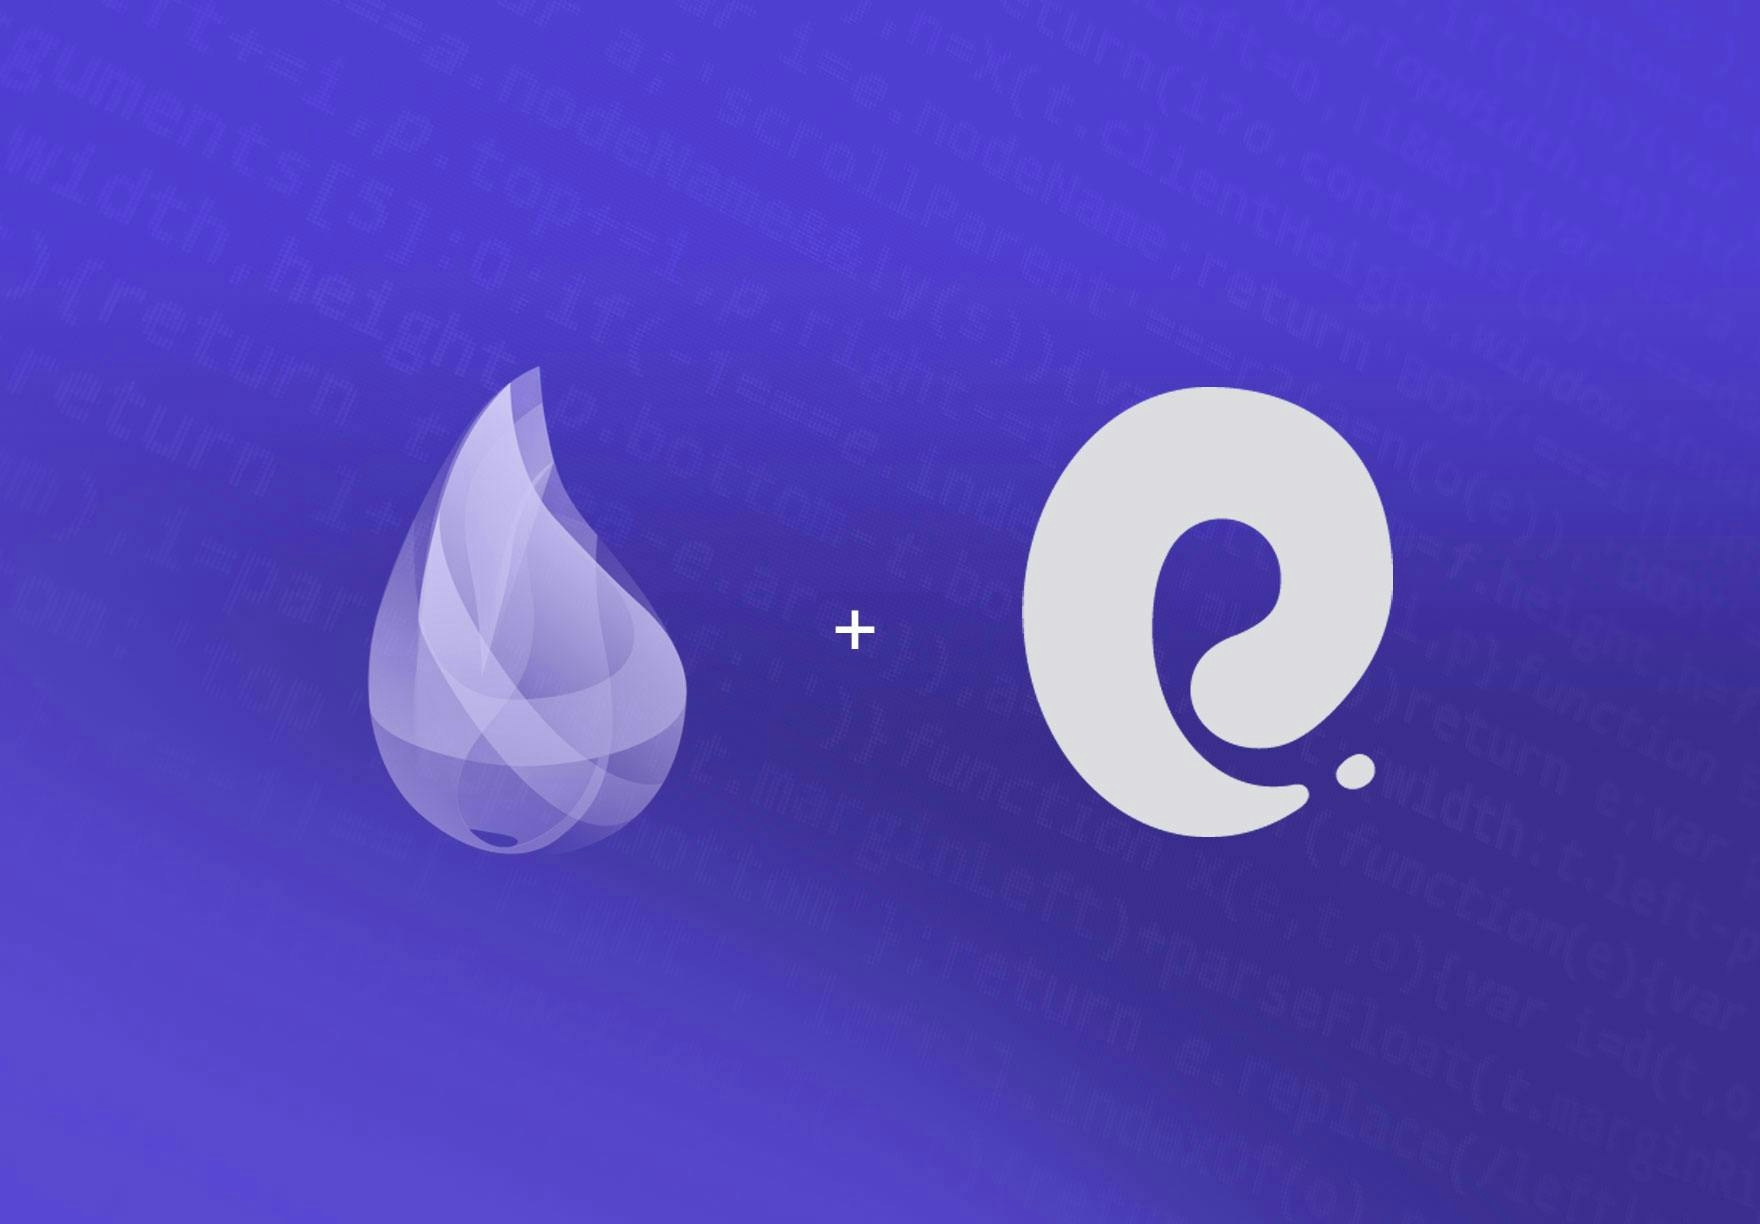 We've prepared an Ecto data model library for Elixir users